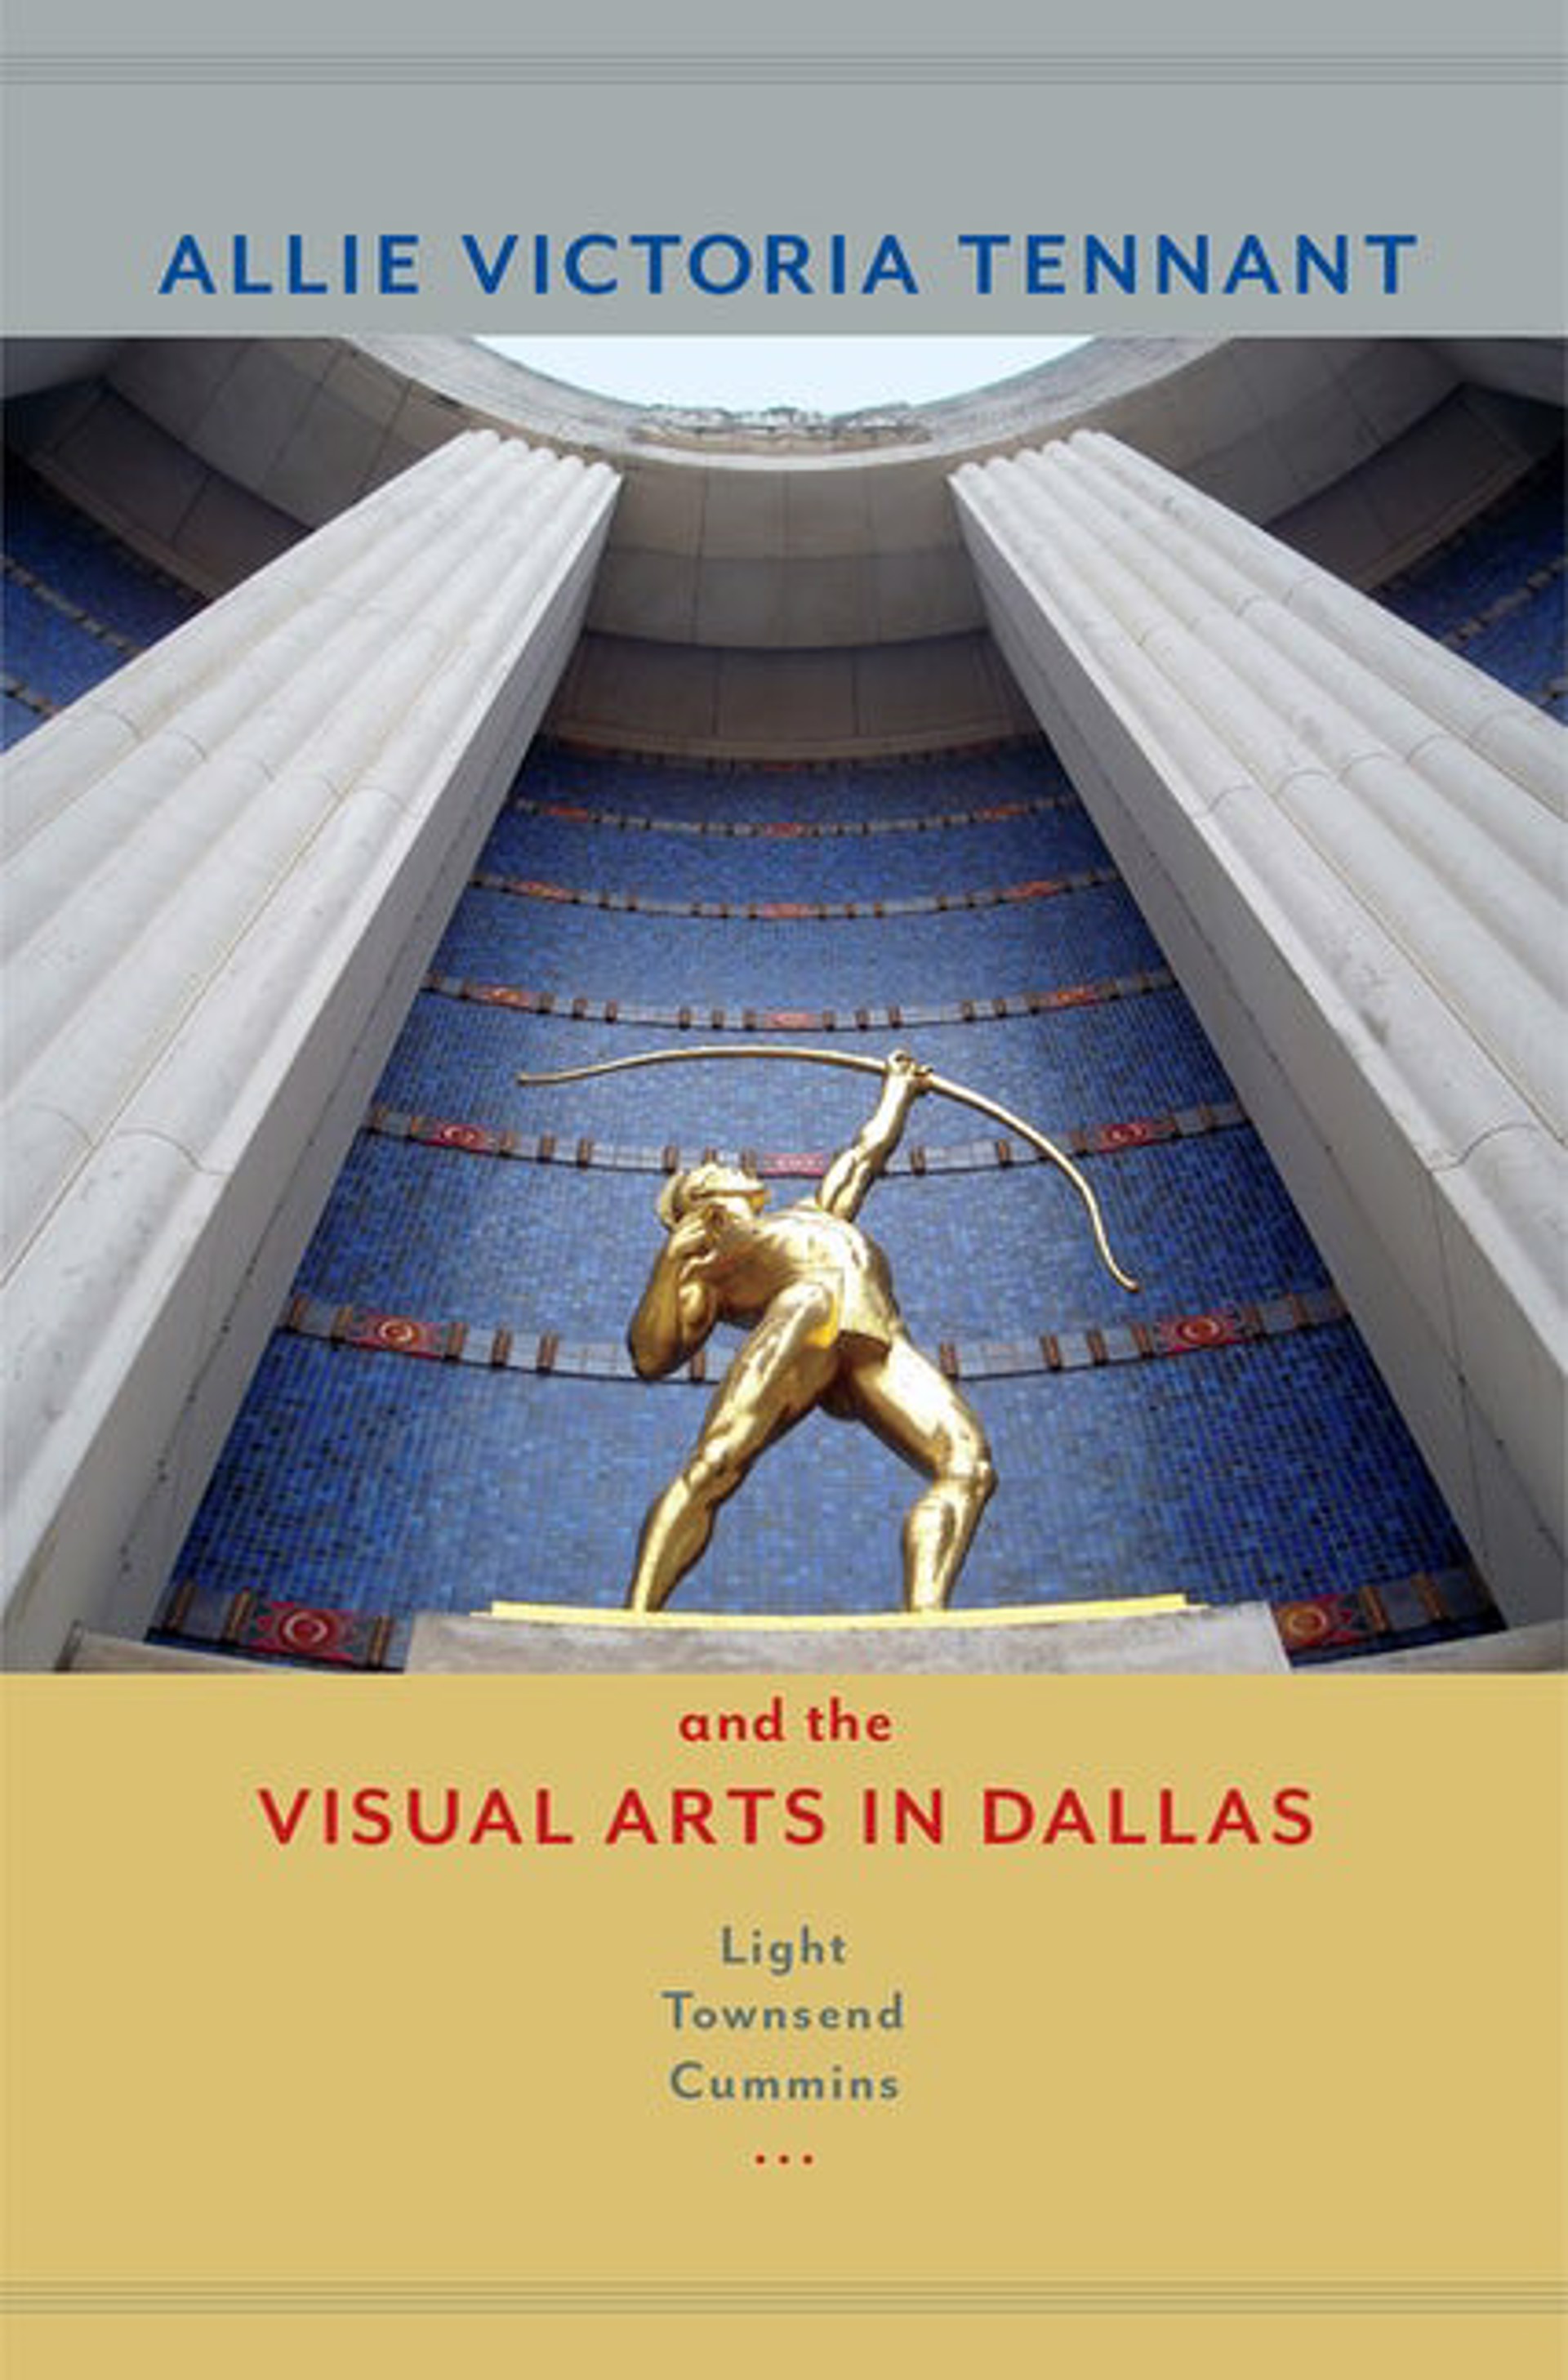 Allie Victoria Tennant and the Visual Arts in Dallas by Publications